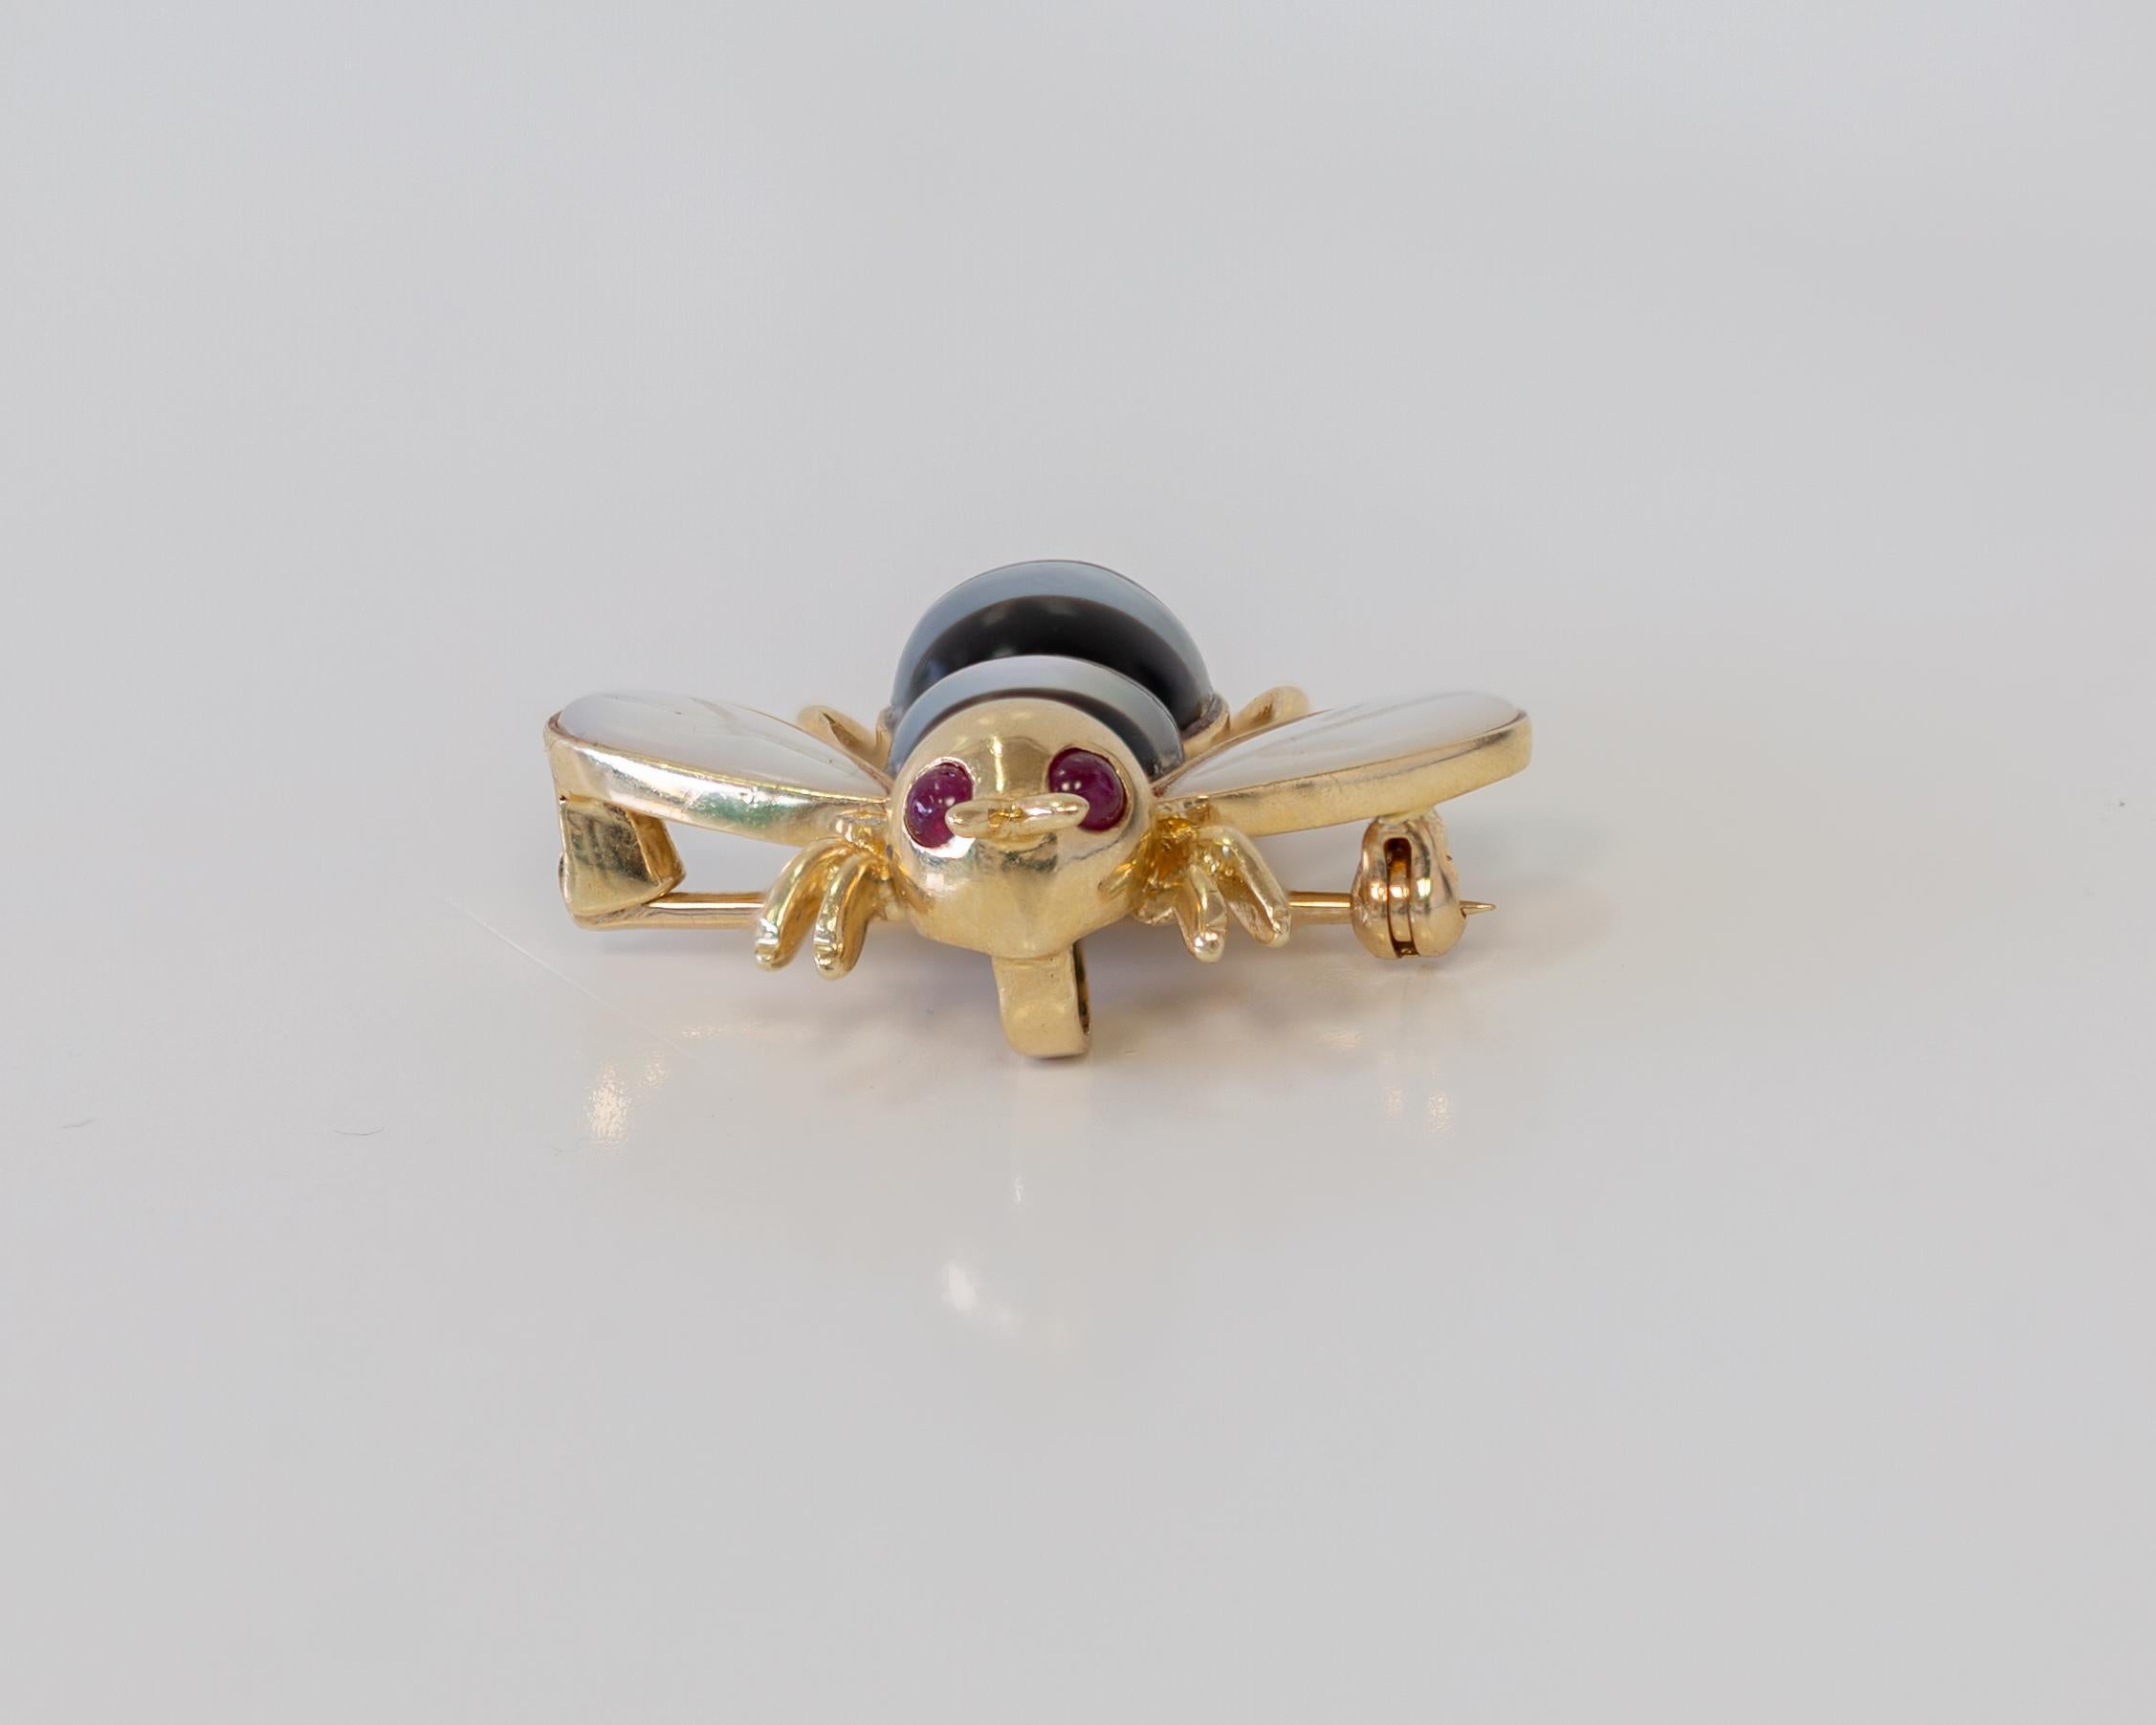 Basic Info 
NB00045
14K Yellow Gold 
Bee Brooch with Black & White Mother of Pearl Stones for Body & Rubies for Eyes 
Brooch Weight 5.1 Grams